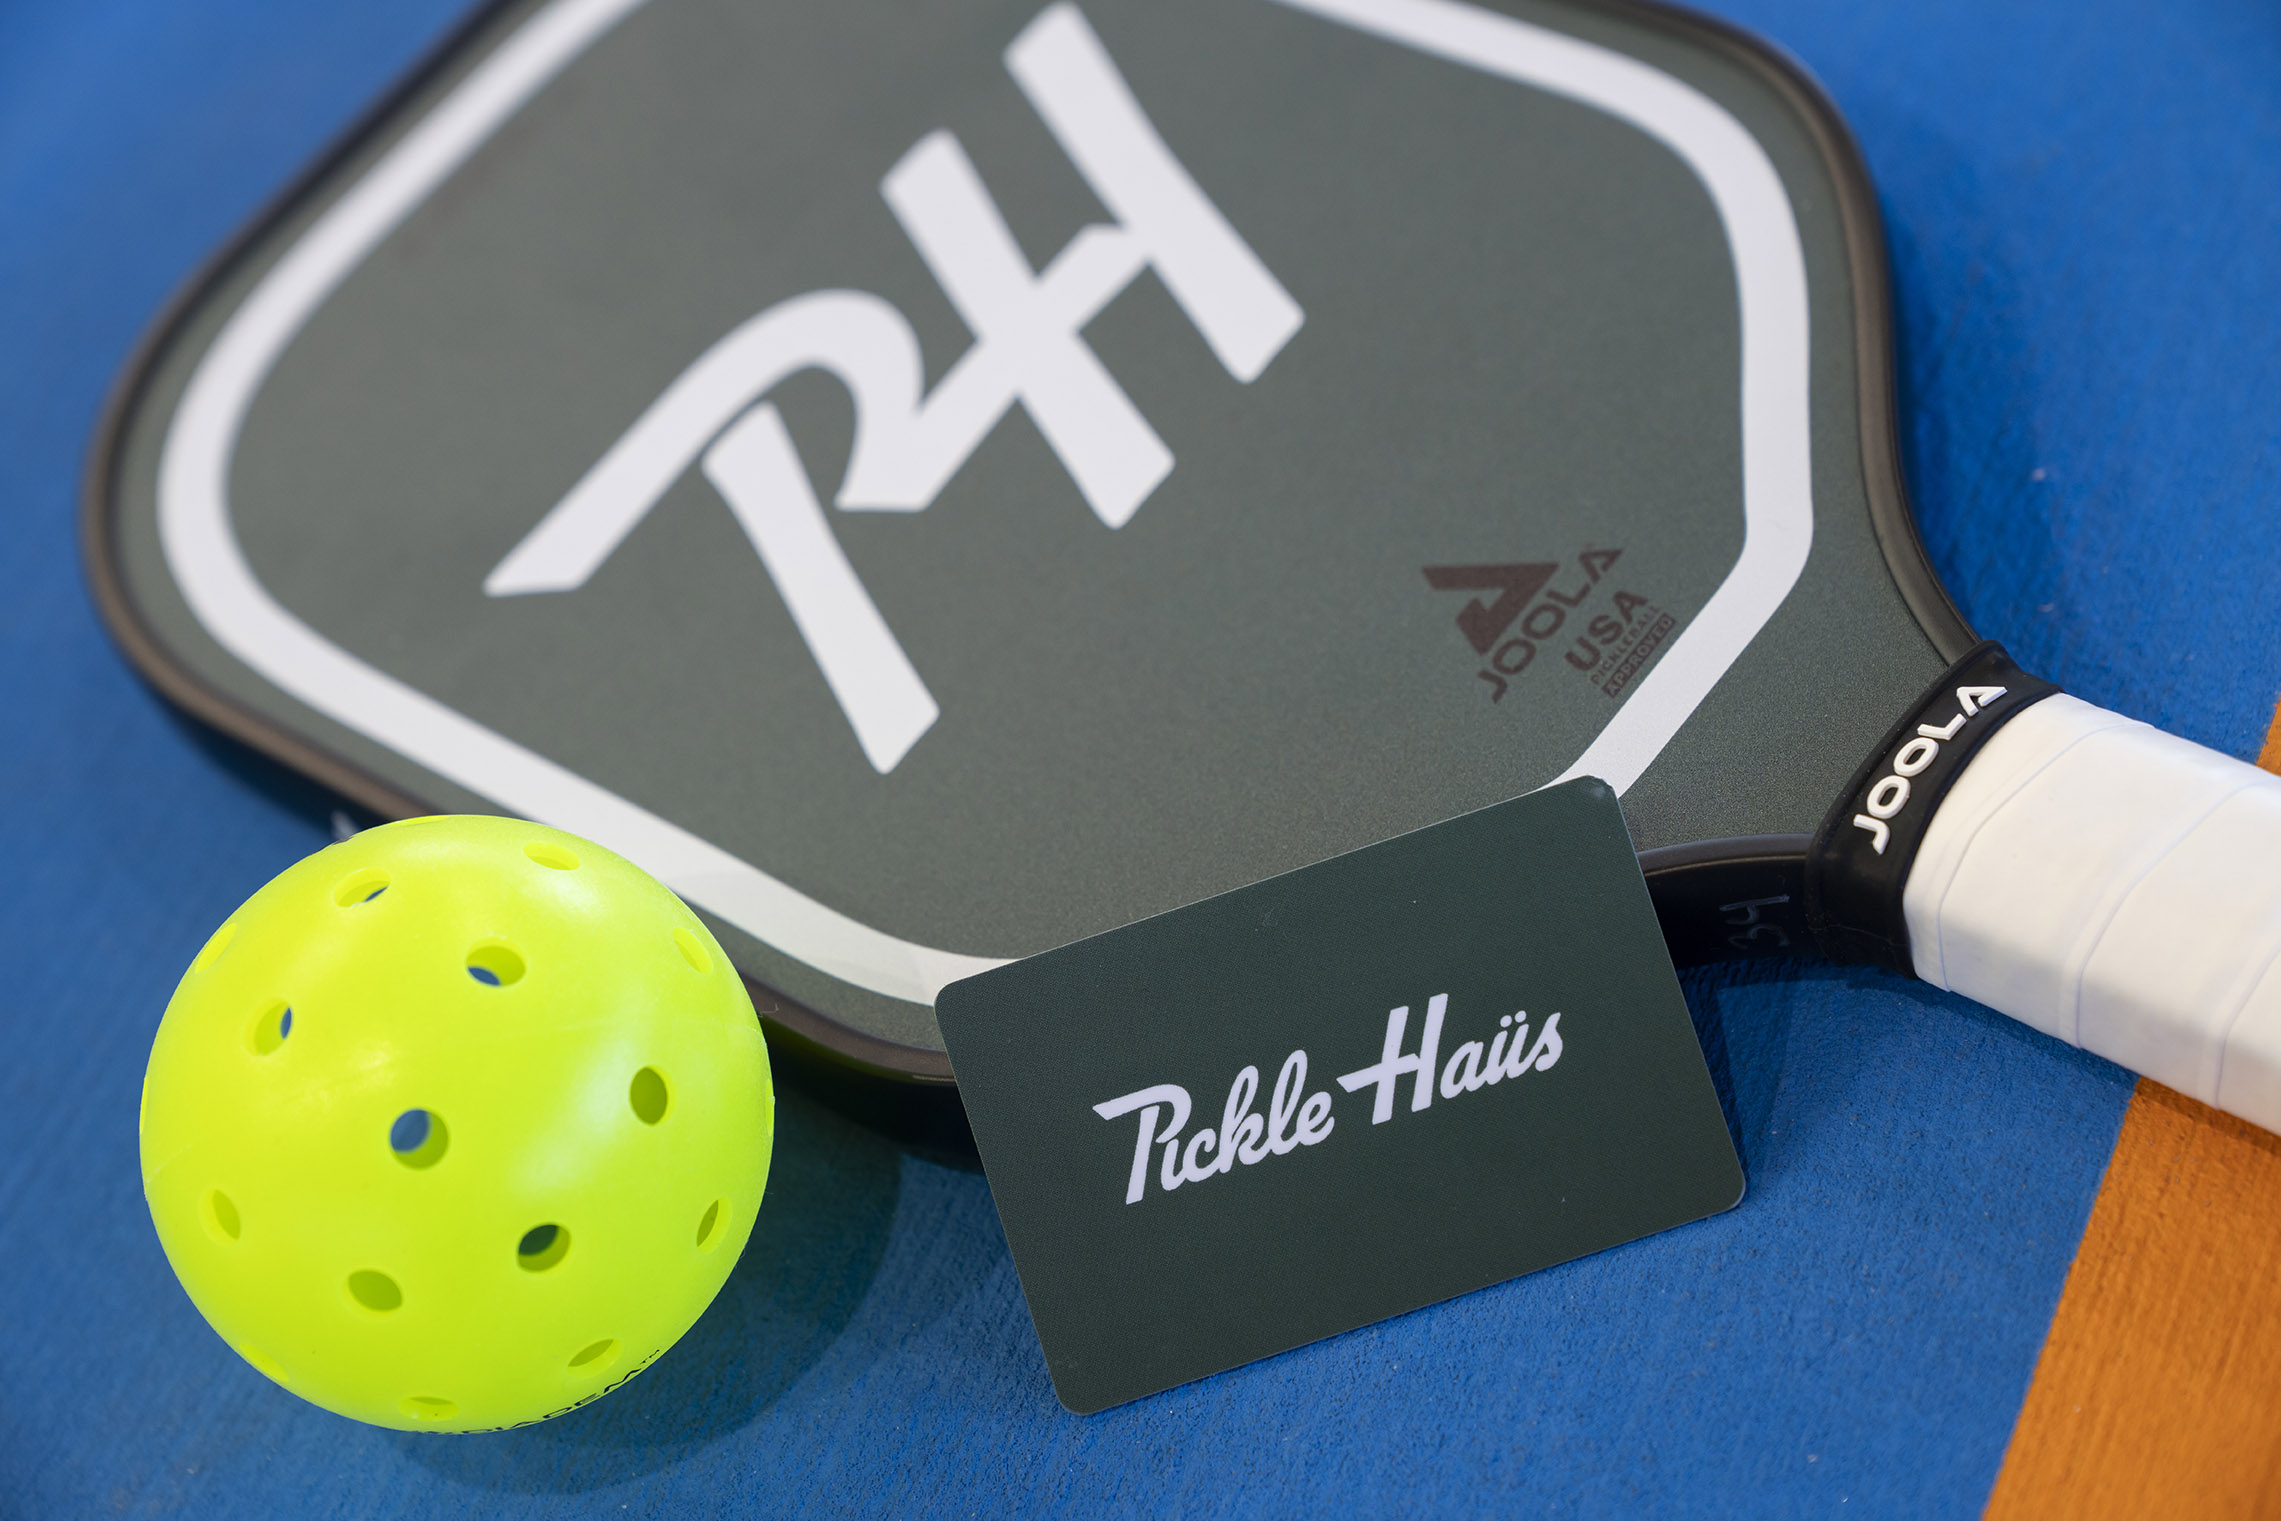 pickleball racquet, ball and gift card for pickle haus